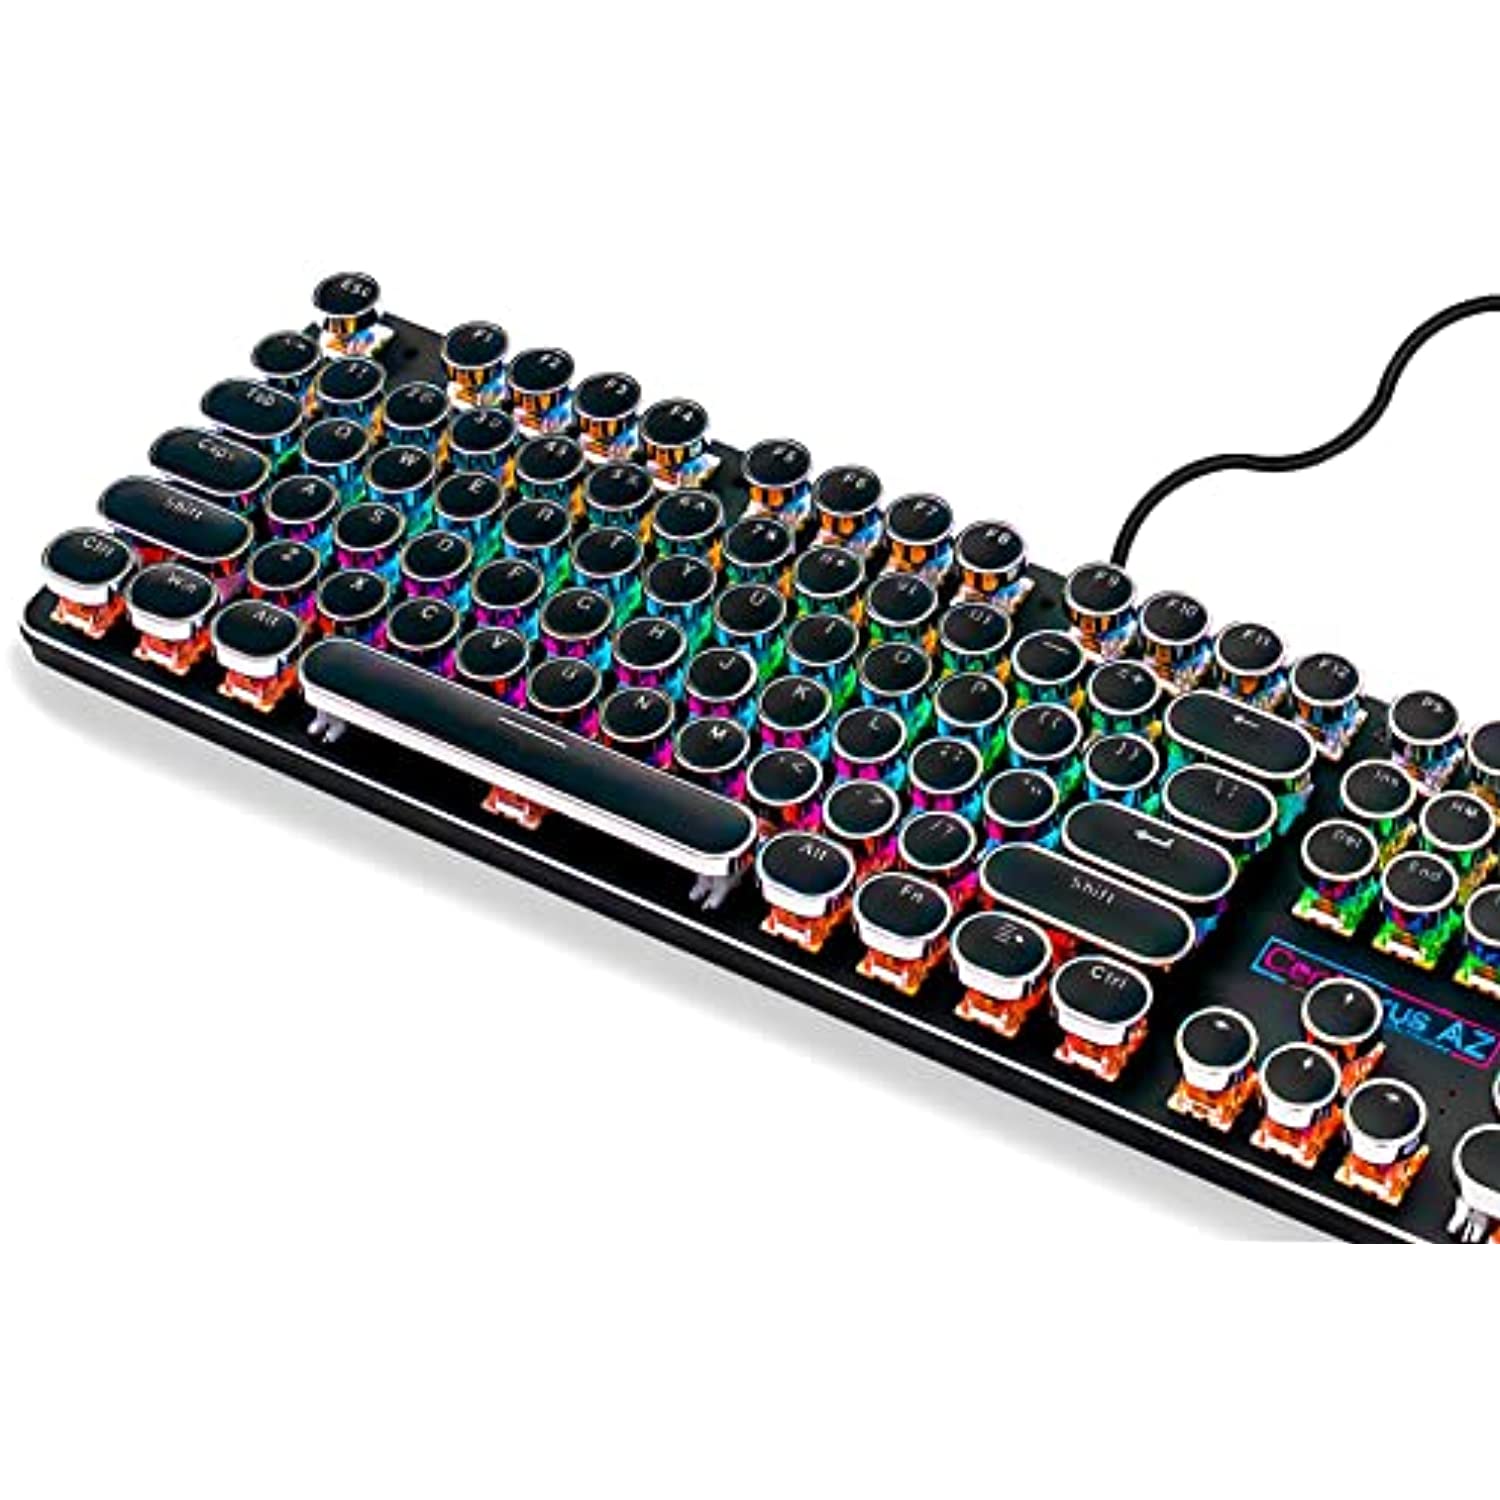 Typewriter Style Mechanical Wired Keyboard for MAC Windows Linux Improved Gaming and Typing Experience Versatile Colorful RGB Retro Keyboard